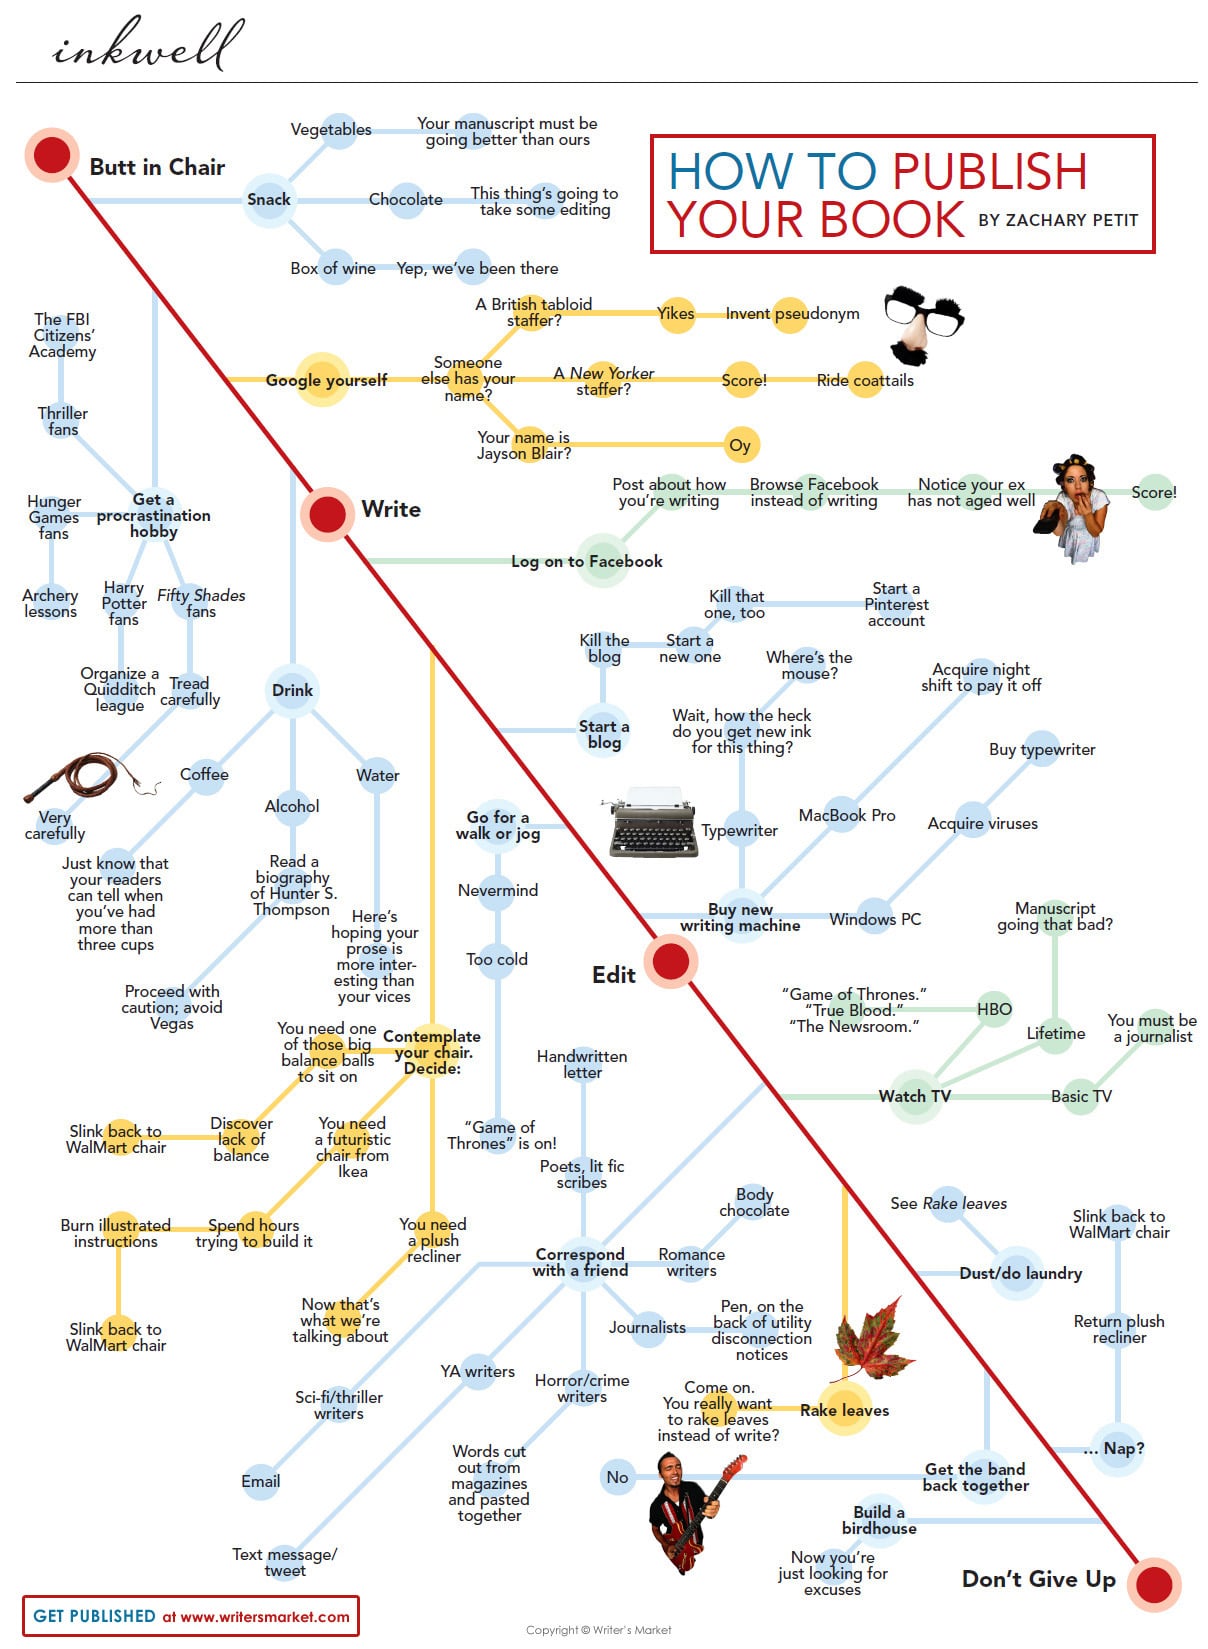 Finally Get Published: How To Publish A Book [Flowchart]